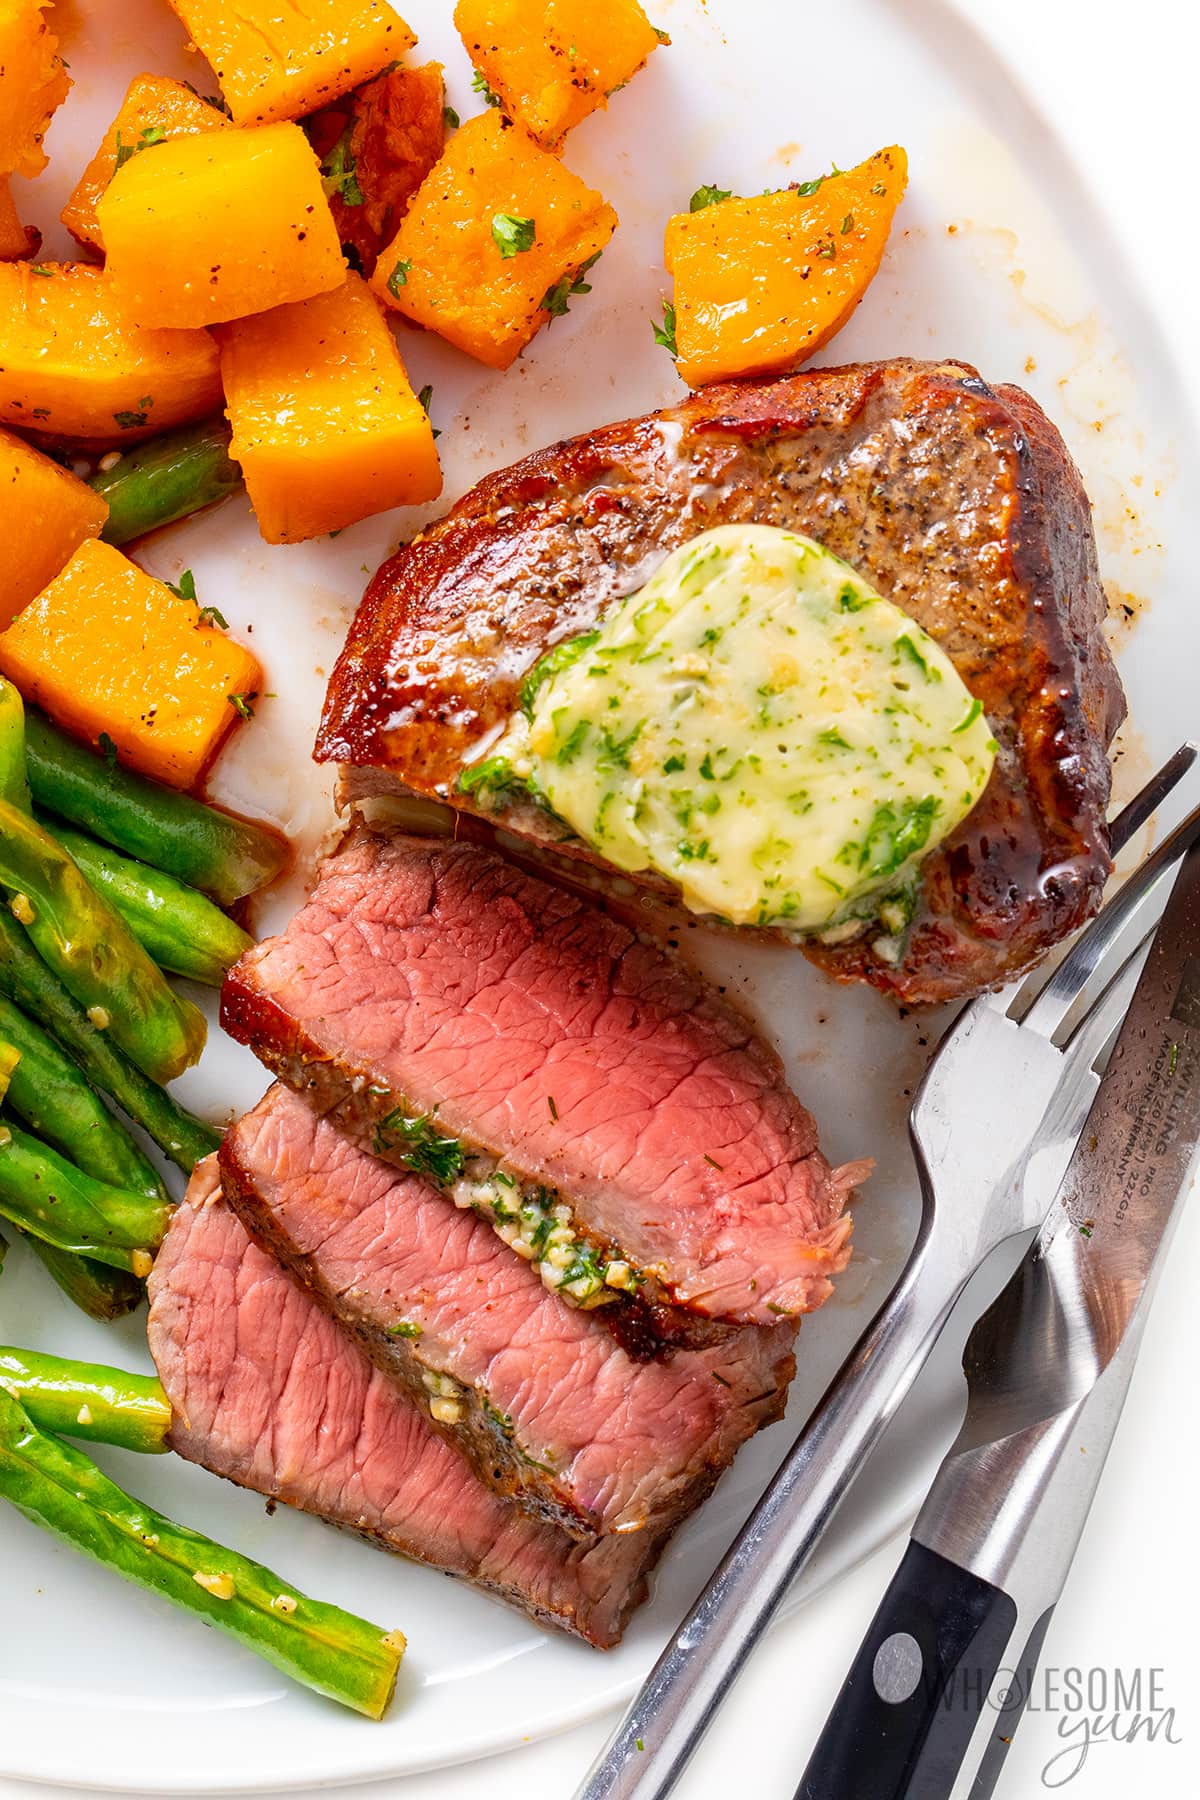 Air fryer steak next to roasted butternut squash and green beans on a plate.